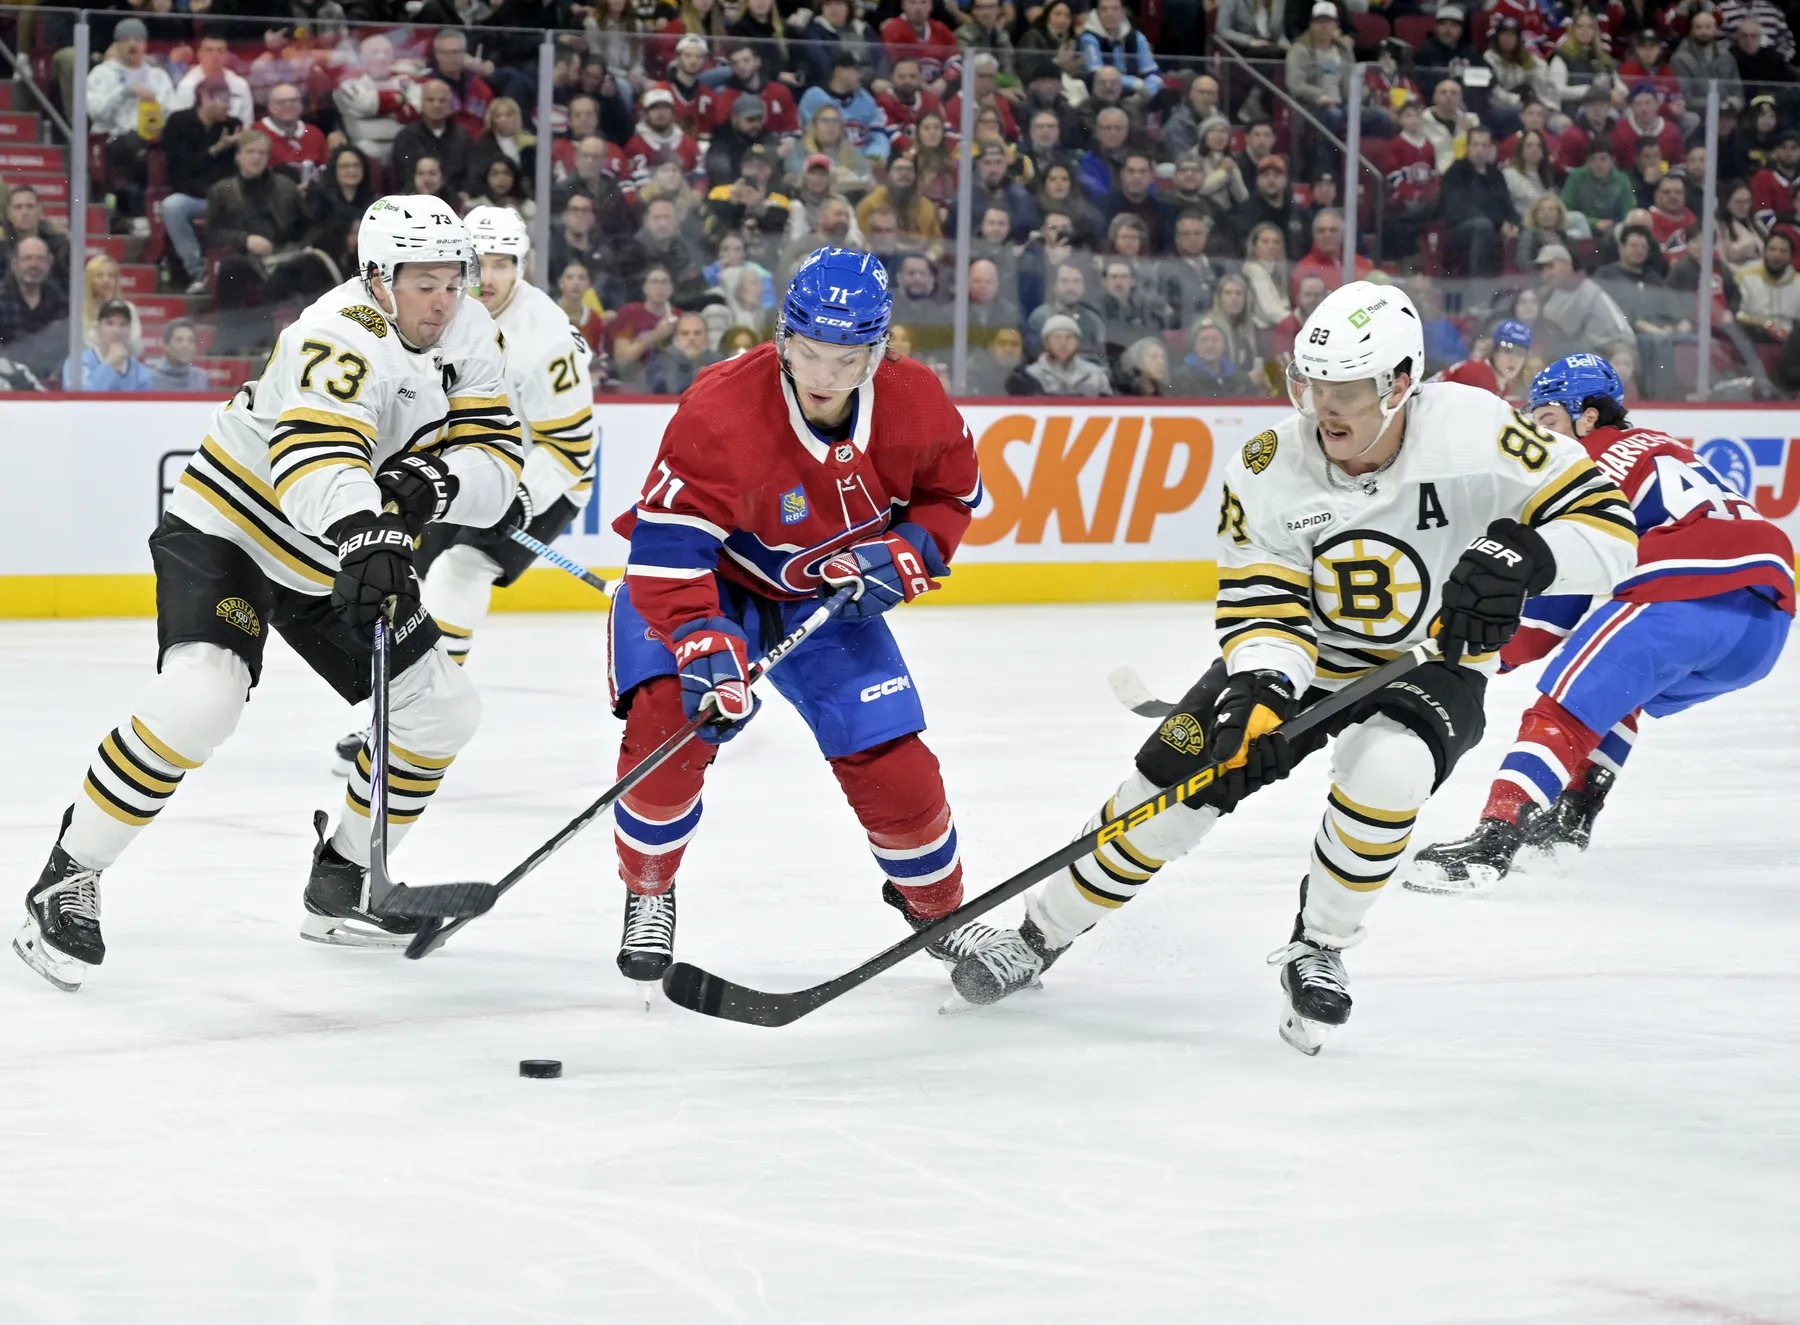 Nov 11, 2023; Montreal, Quebec, CAN; Montreal Canadiens forward Jake Evans (71) plays the puck and Boston Bruins defenseman Charlie McAvoy (73) and teammate forward David Pastrnak (88) defend during the second period at the Bell Centre. Mandatory Credit: Eric Bolte-USA TODAY Sports